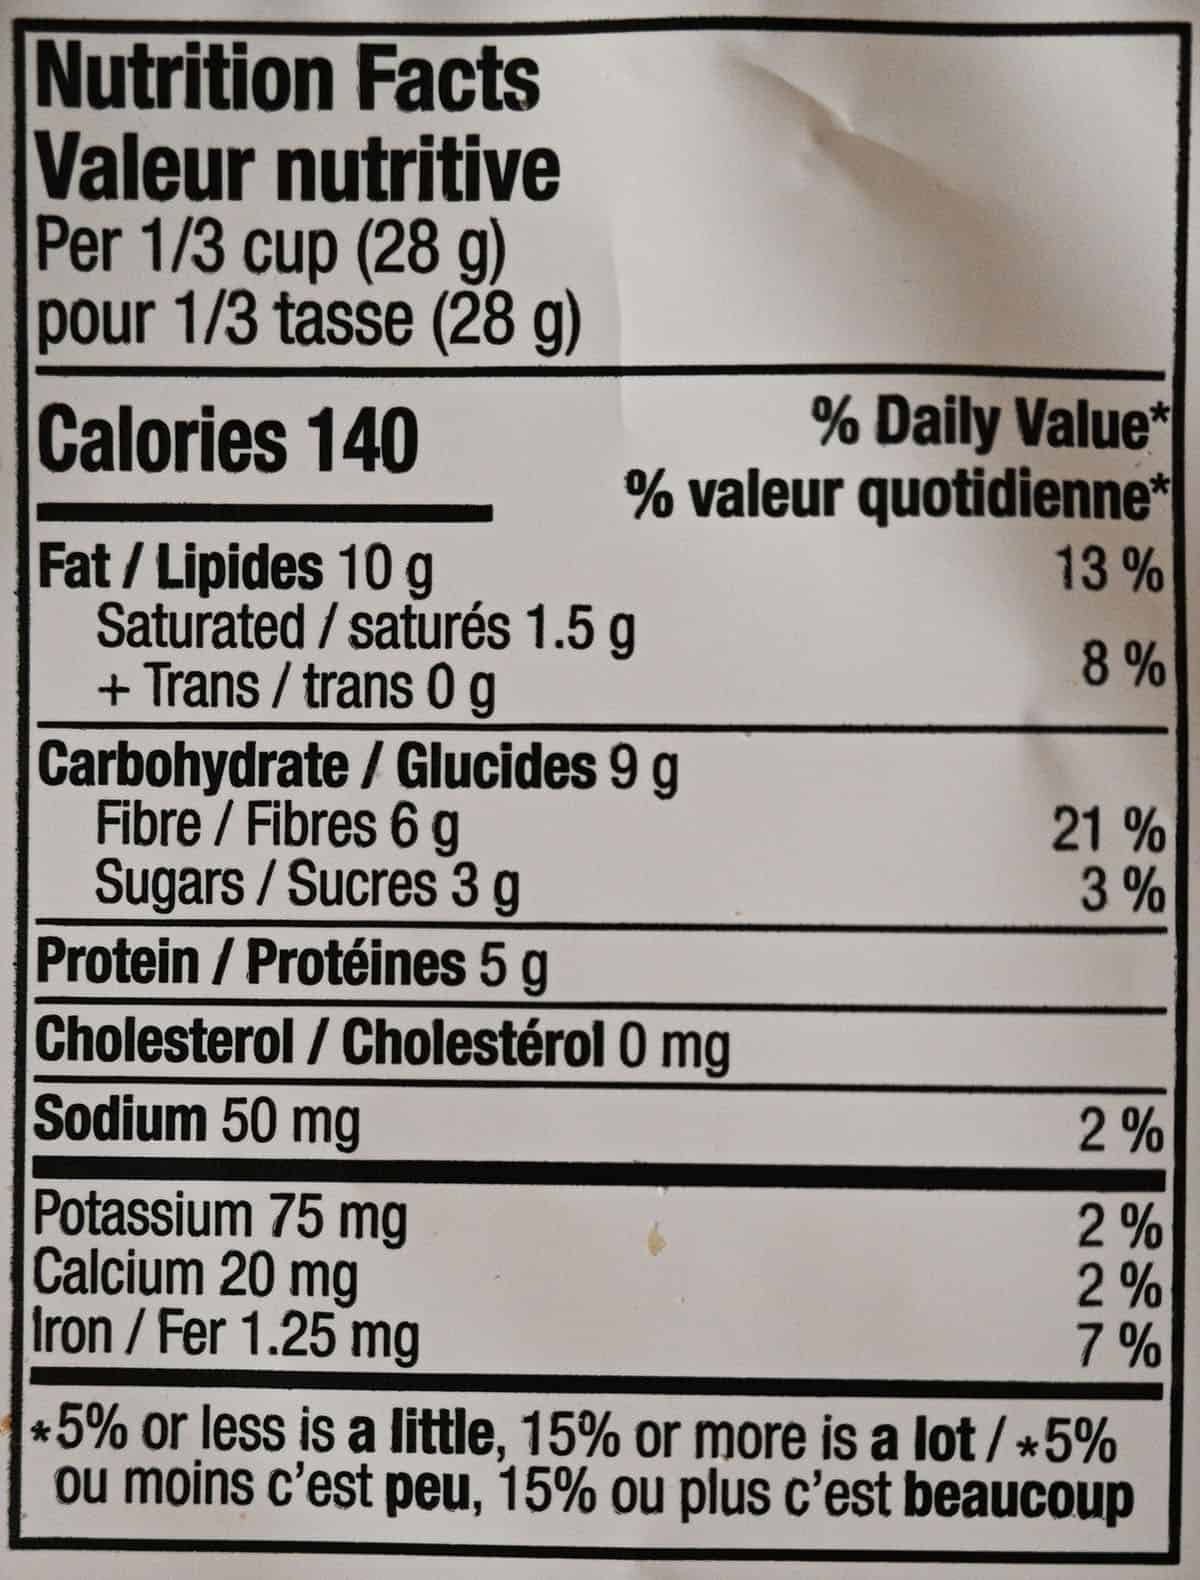 Image of the nutrition facts label from the bag of granola.